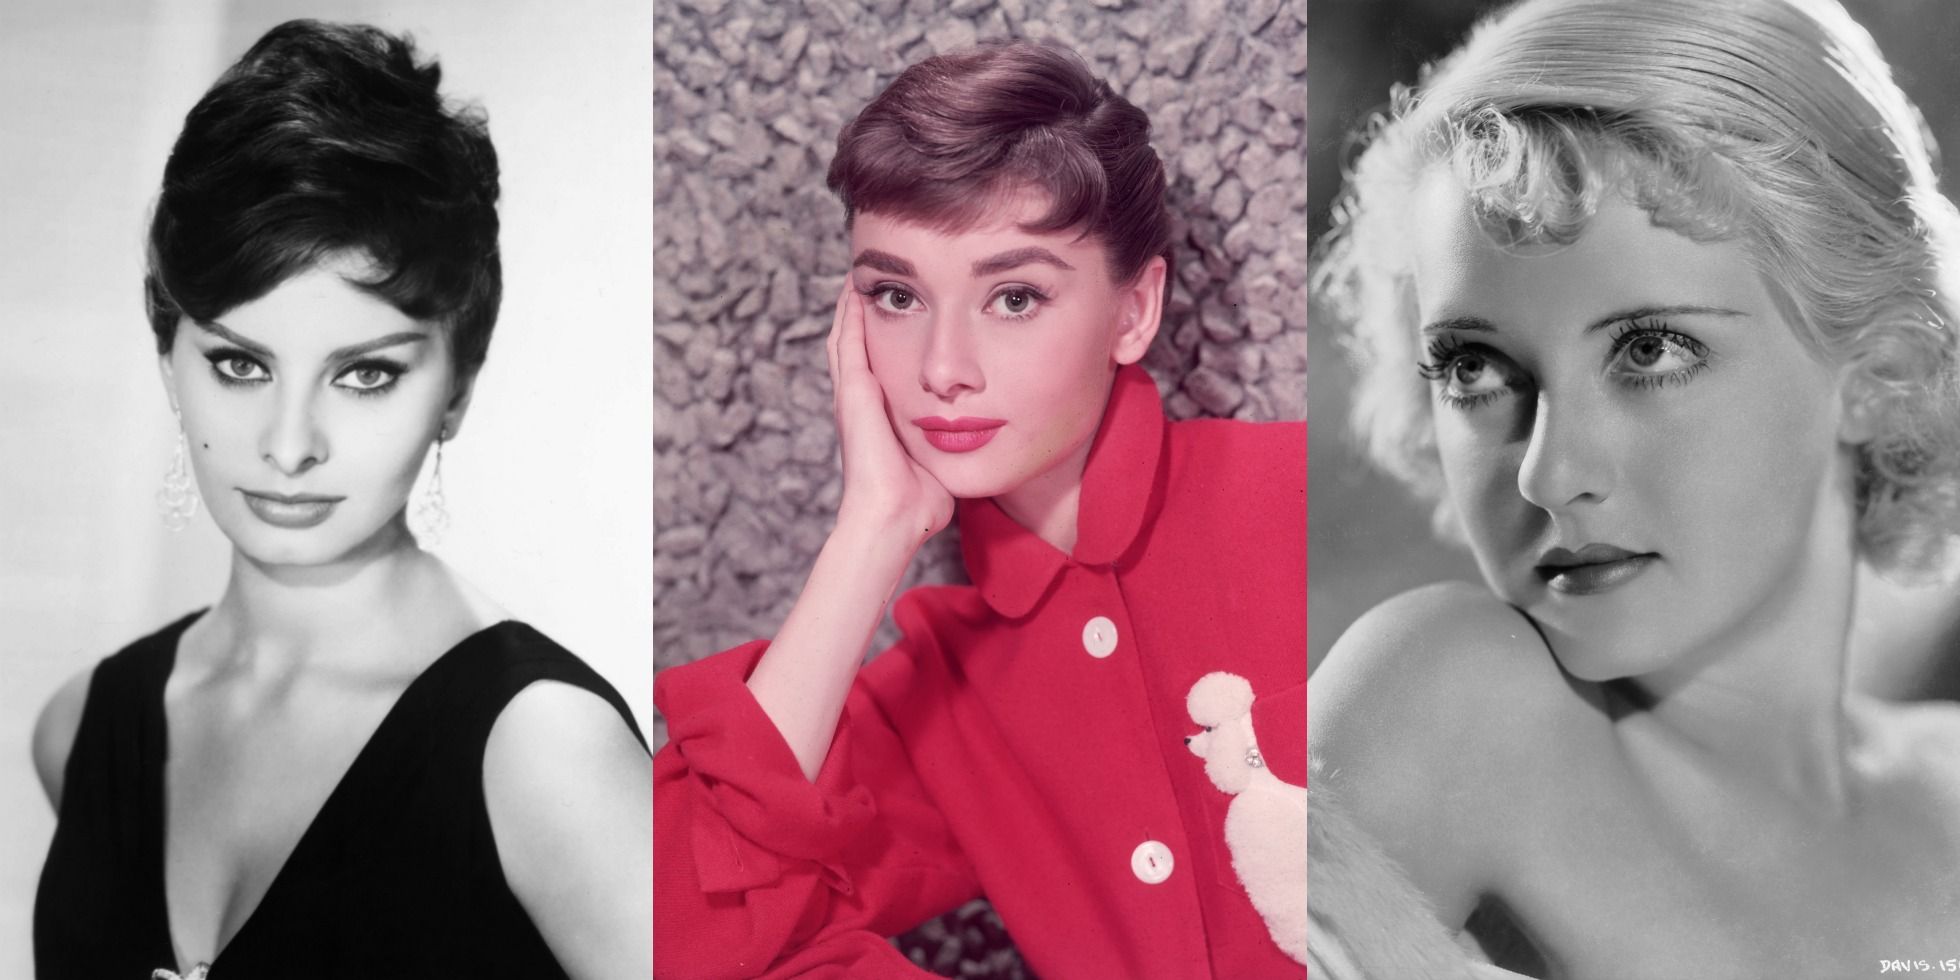 40 Old Hollywood Actresses Who Aged Beautifully - Hollywood Starlets Then  and Now